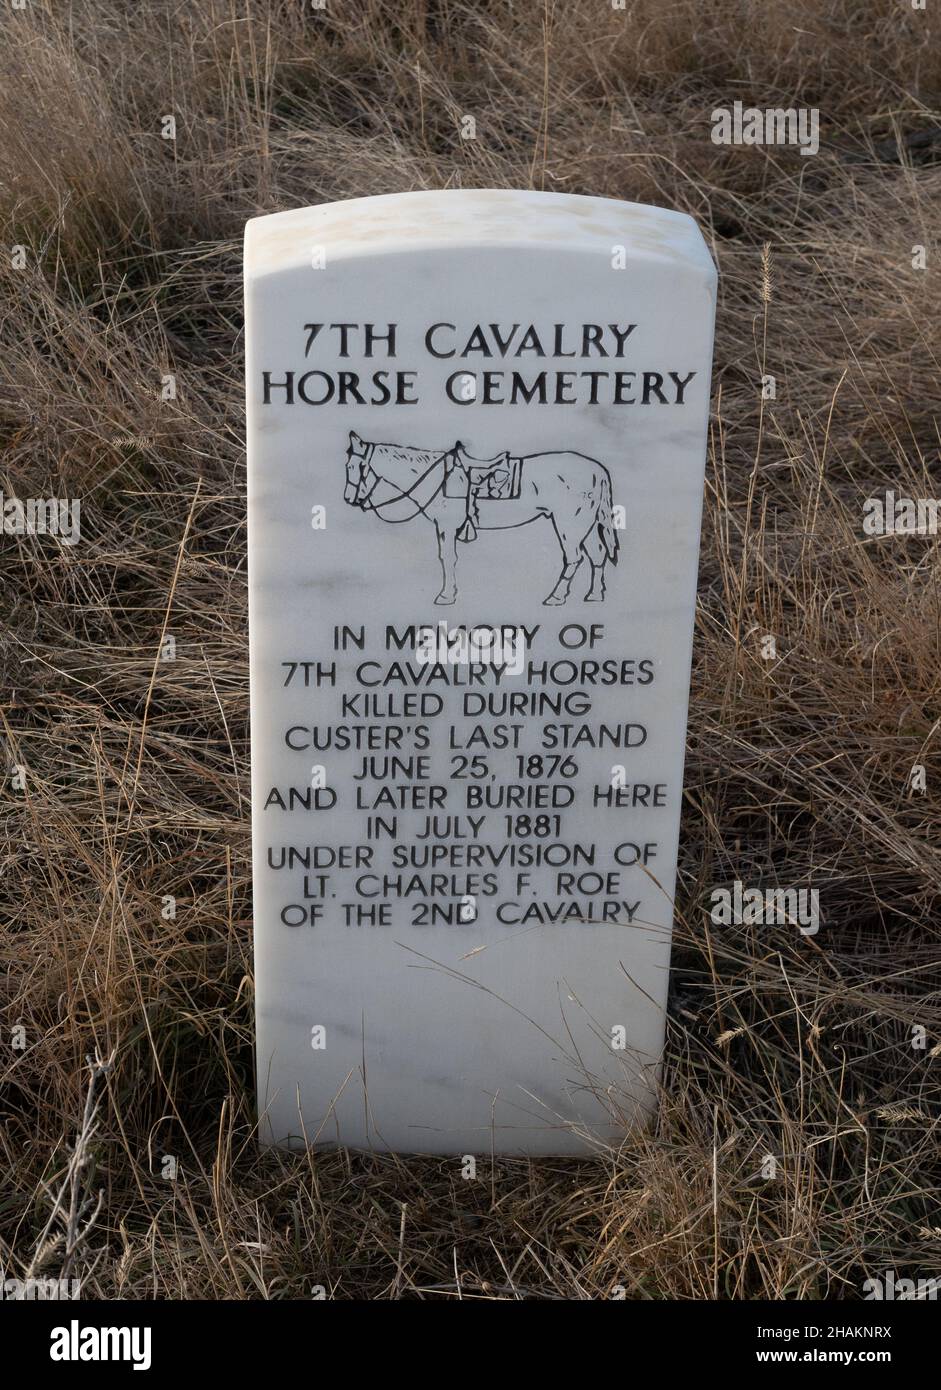 Tombstone for the 7th Cavalry horses who died at the Little Bighorn Battle during the Indian Wars in 1876. Stock Photo